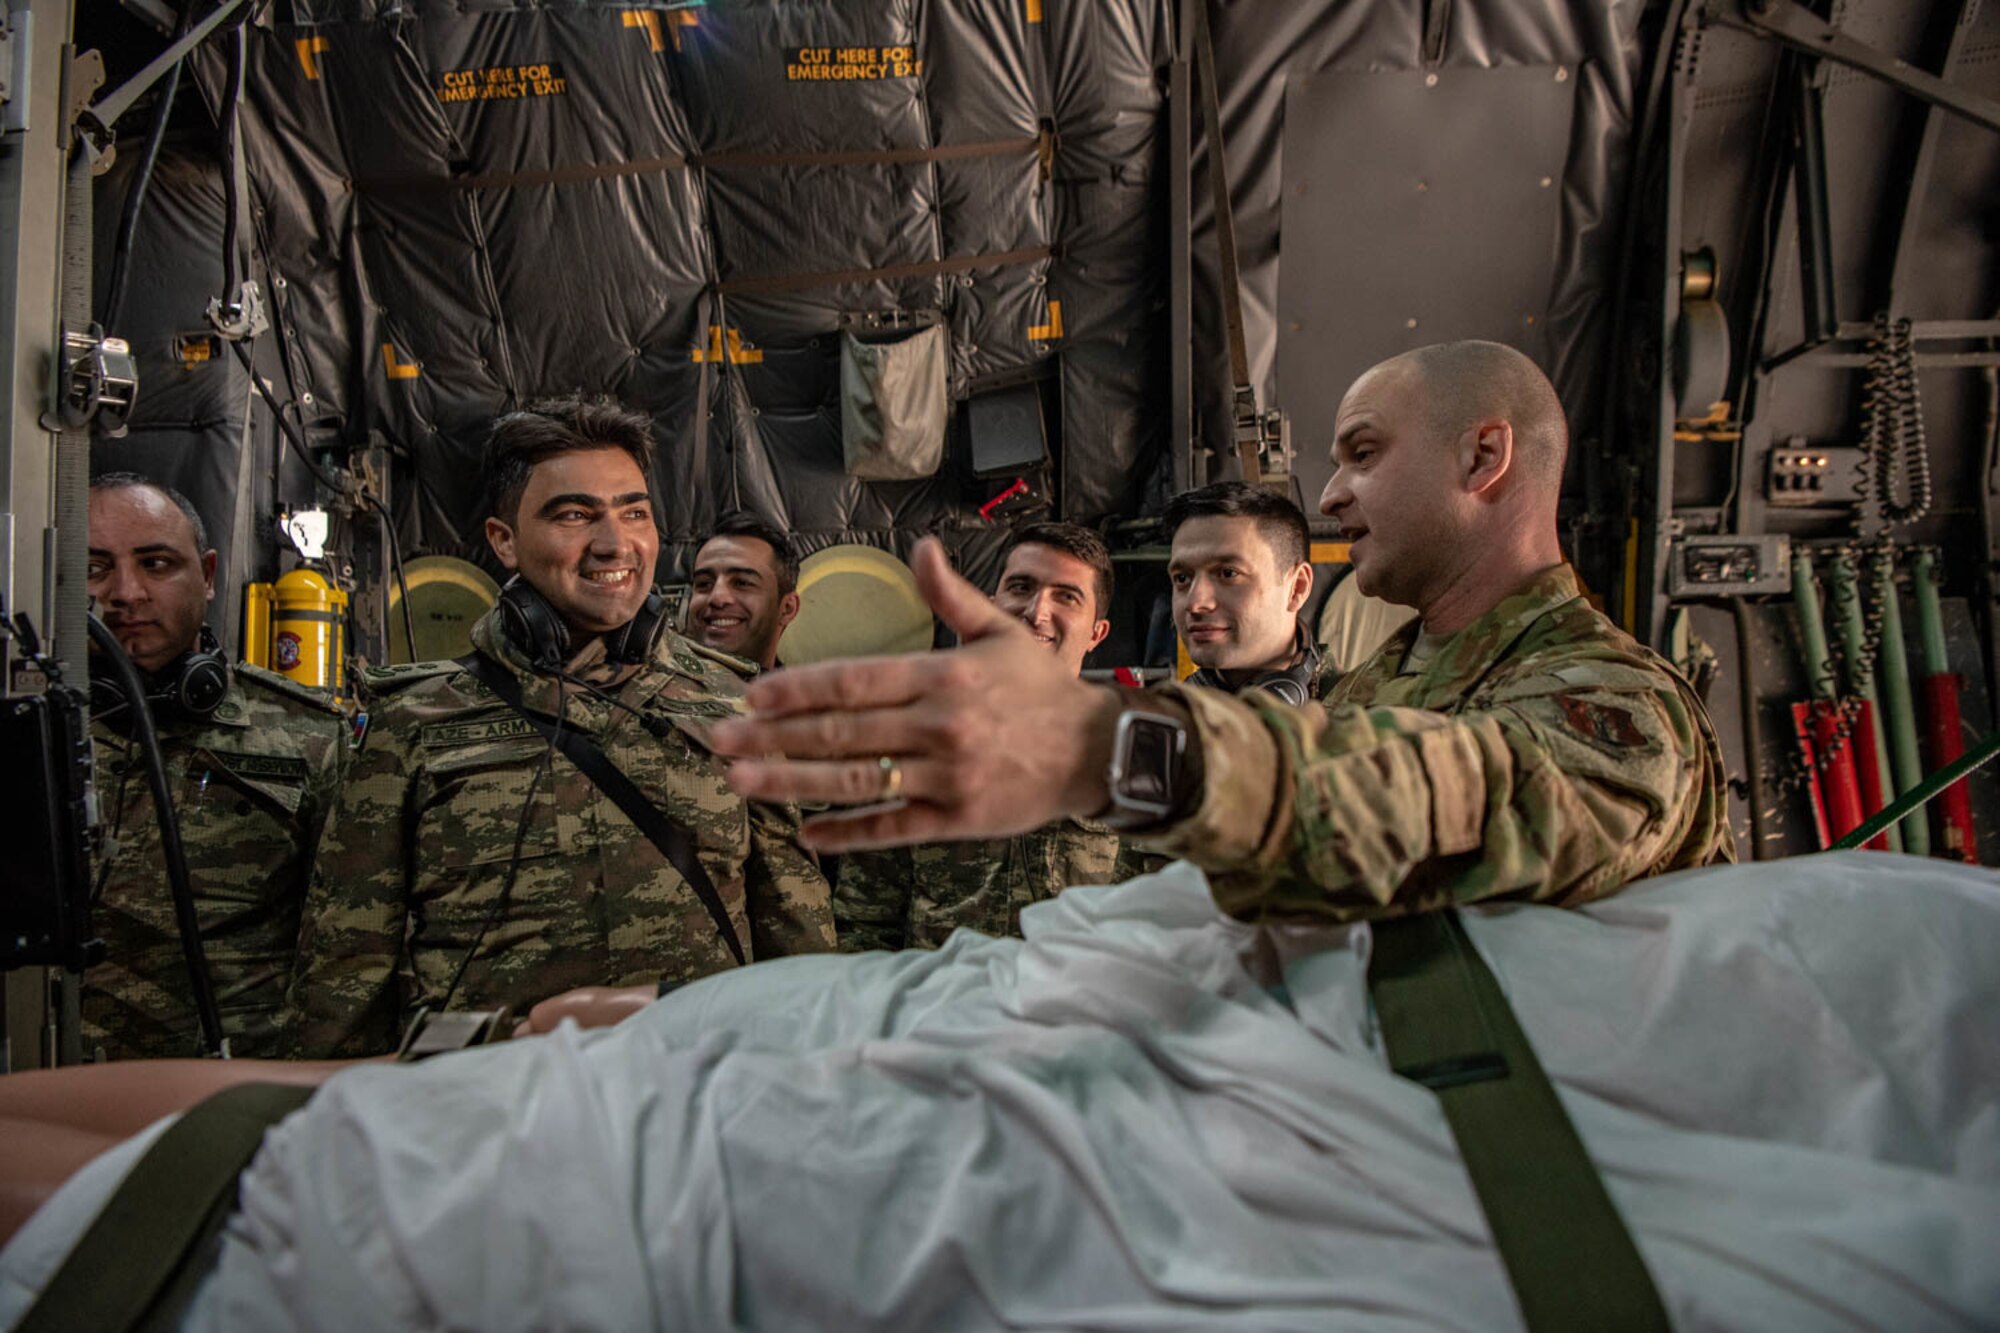 U.S. Air Force Lt. Col. Christopher Lane, director of operations for the 137th Aeromedical Evacuation Squadron, speaks to doctors with the Azerbaijan Operational Capabilities Concept Battalion about aeromedical evacuation roles during a medical knowledge exchange event in Oklahoma City March 30, 2022. The knowledge exchange involved the participation and support of Guardsmen with both the Oklahoma Army and Air National Guard in support of the State Partnership Program.